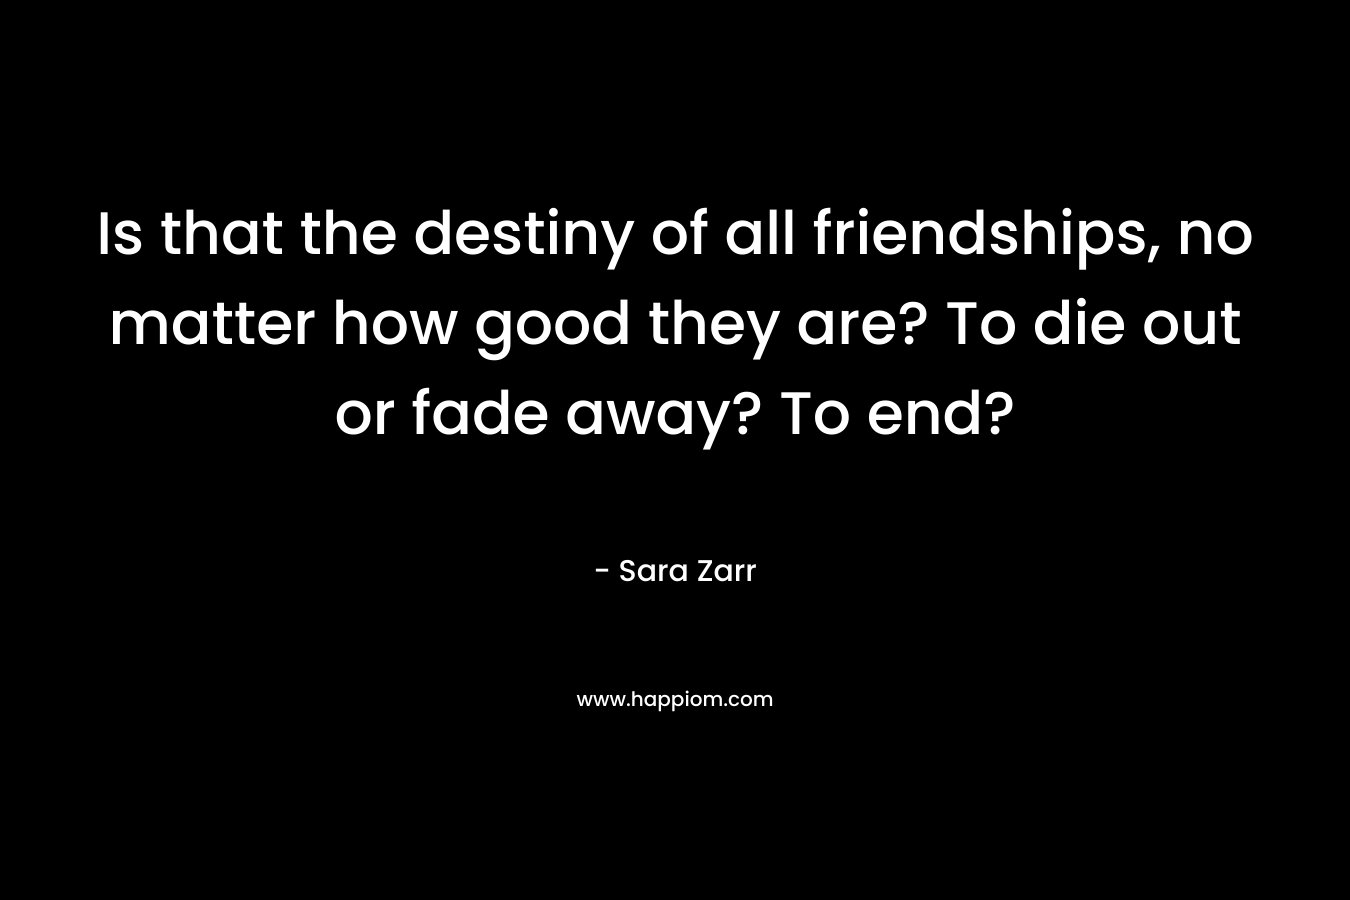 Is that the destiny of all friendships, no matter how good they are? To die out or fade away? To end?